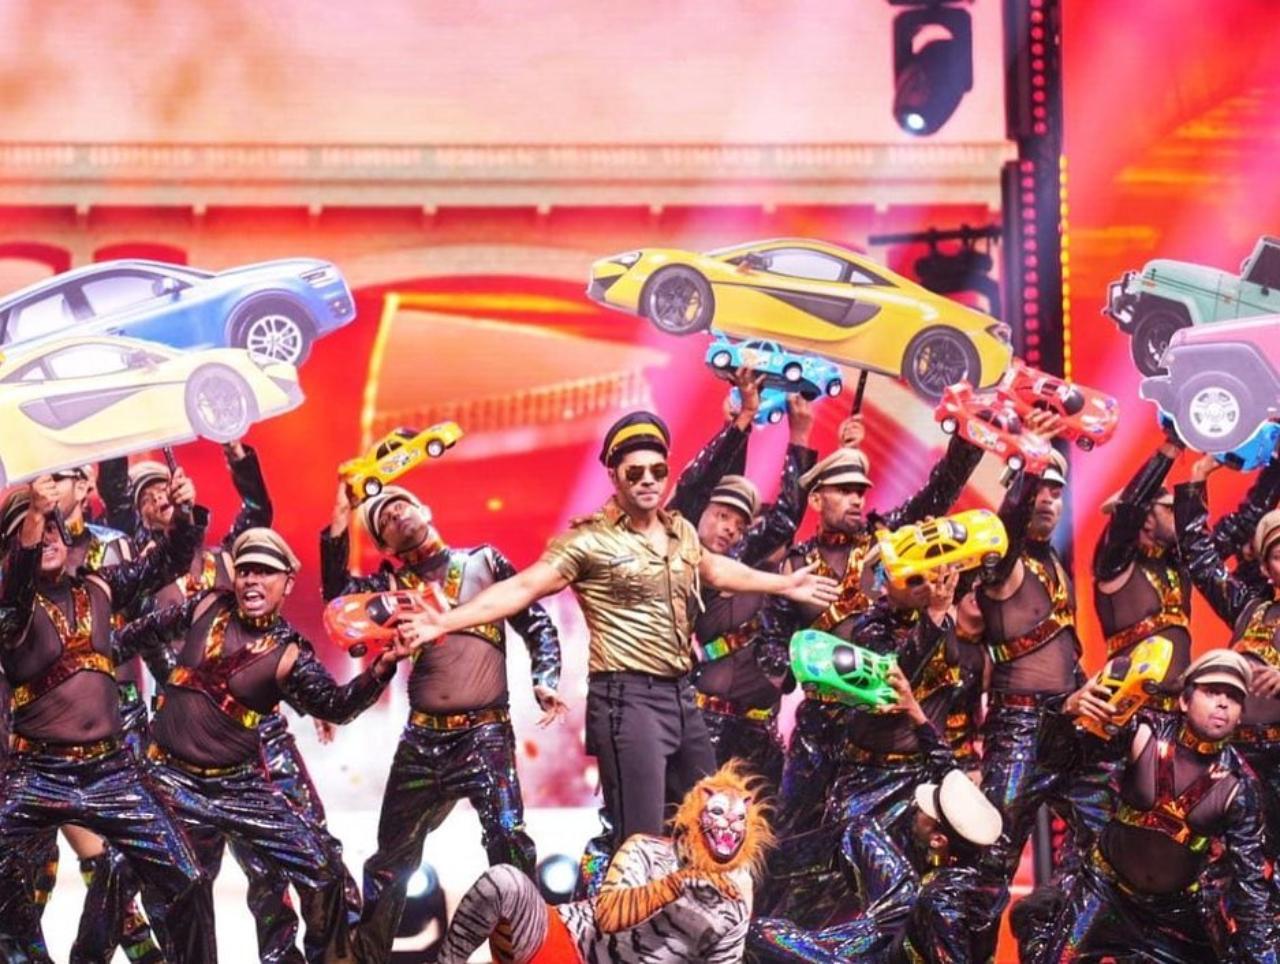 Varun Dhawan also put up an exhilarating performance at the awards night. With multiple costume changes, the actor was at his finest as he performed to hit Bollywood tracks